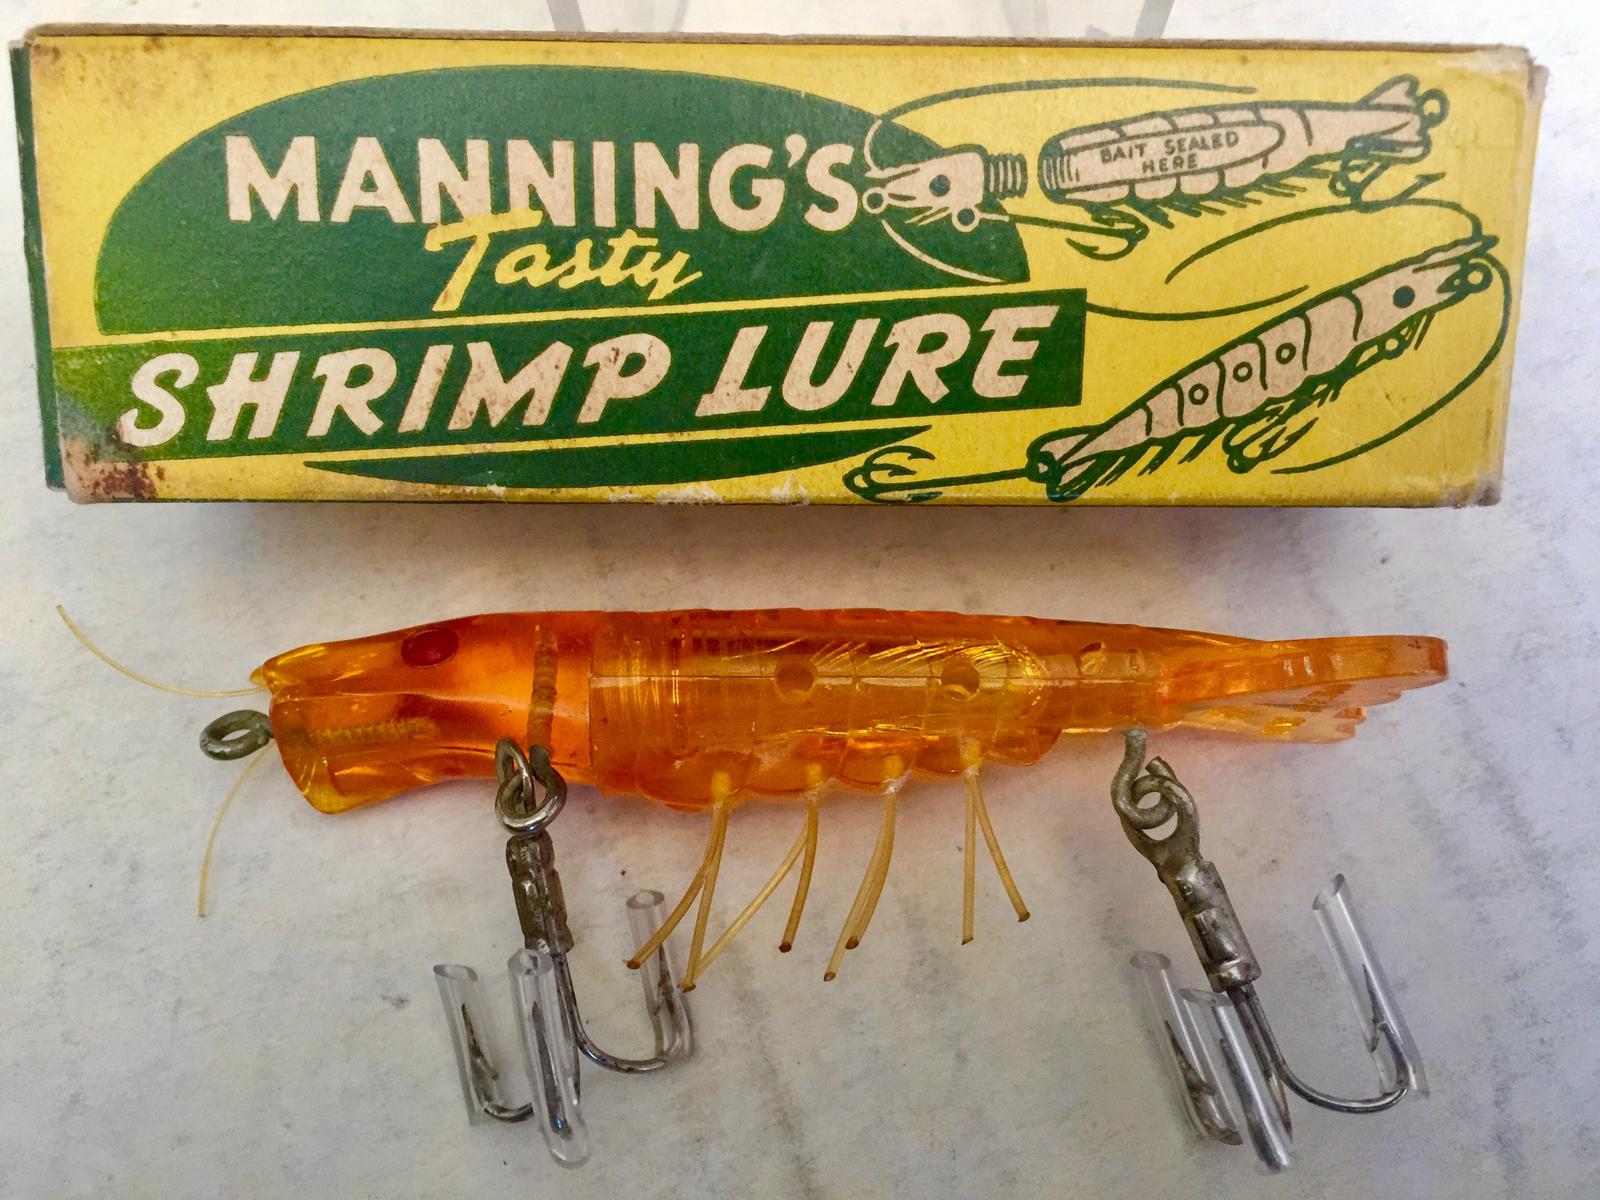 Manning's Shrimp Lure/green and yellow box